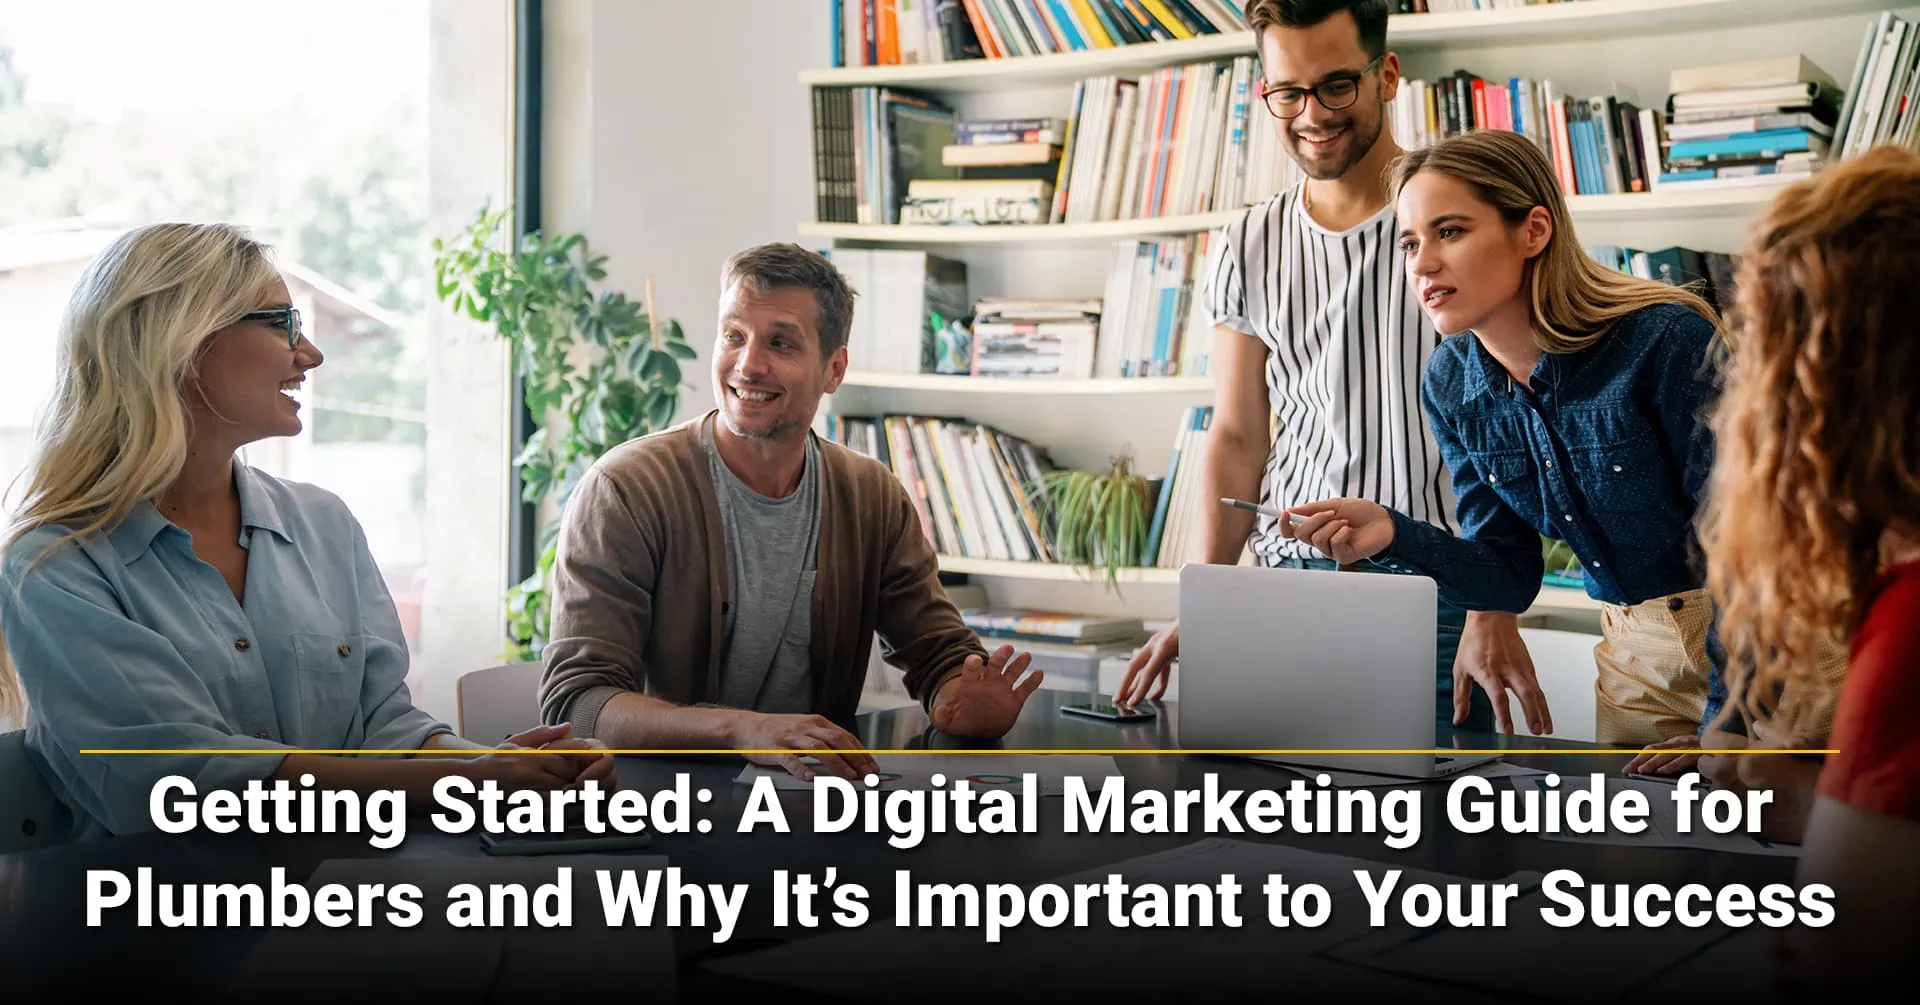 Getting Started: A Digital Marketing Guide for Plumbers and Why It’s Important to Your Success